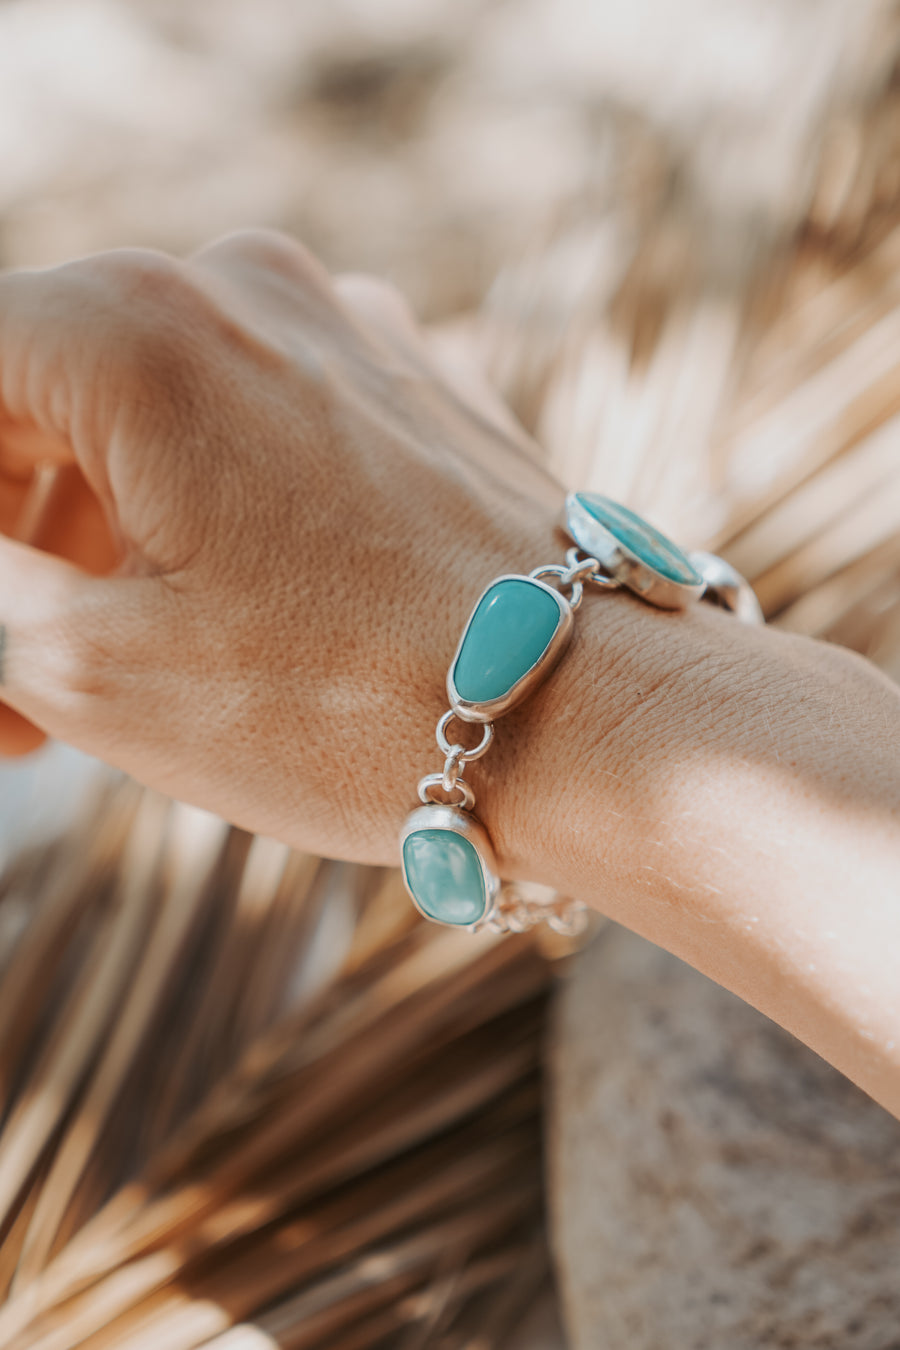 The Stepping Stone Bracelet in Campitos Turquoise